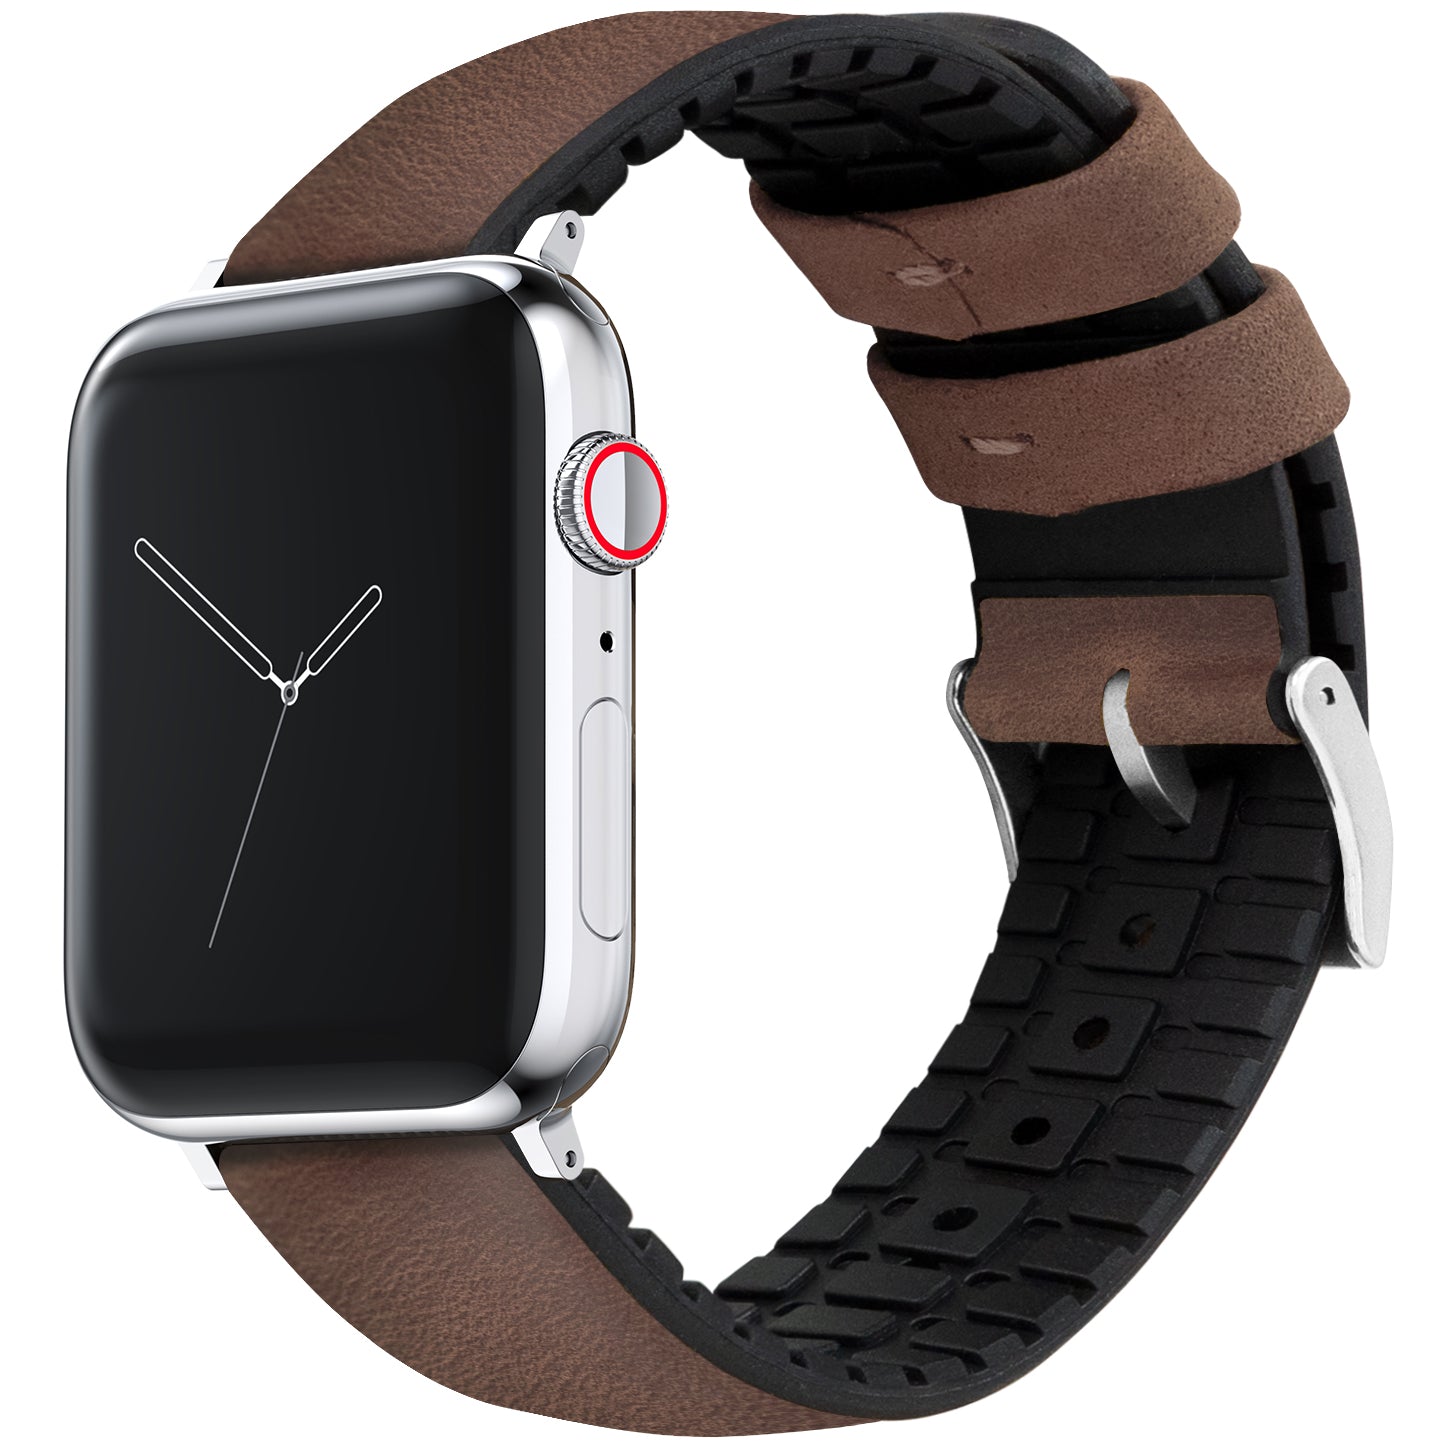 Apple Watch | Walnut Brown Leather and Rubber Hybrid - Barton Watch Bands